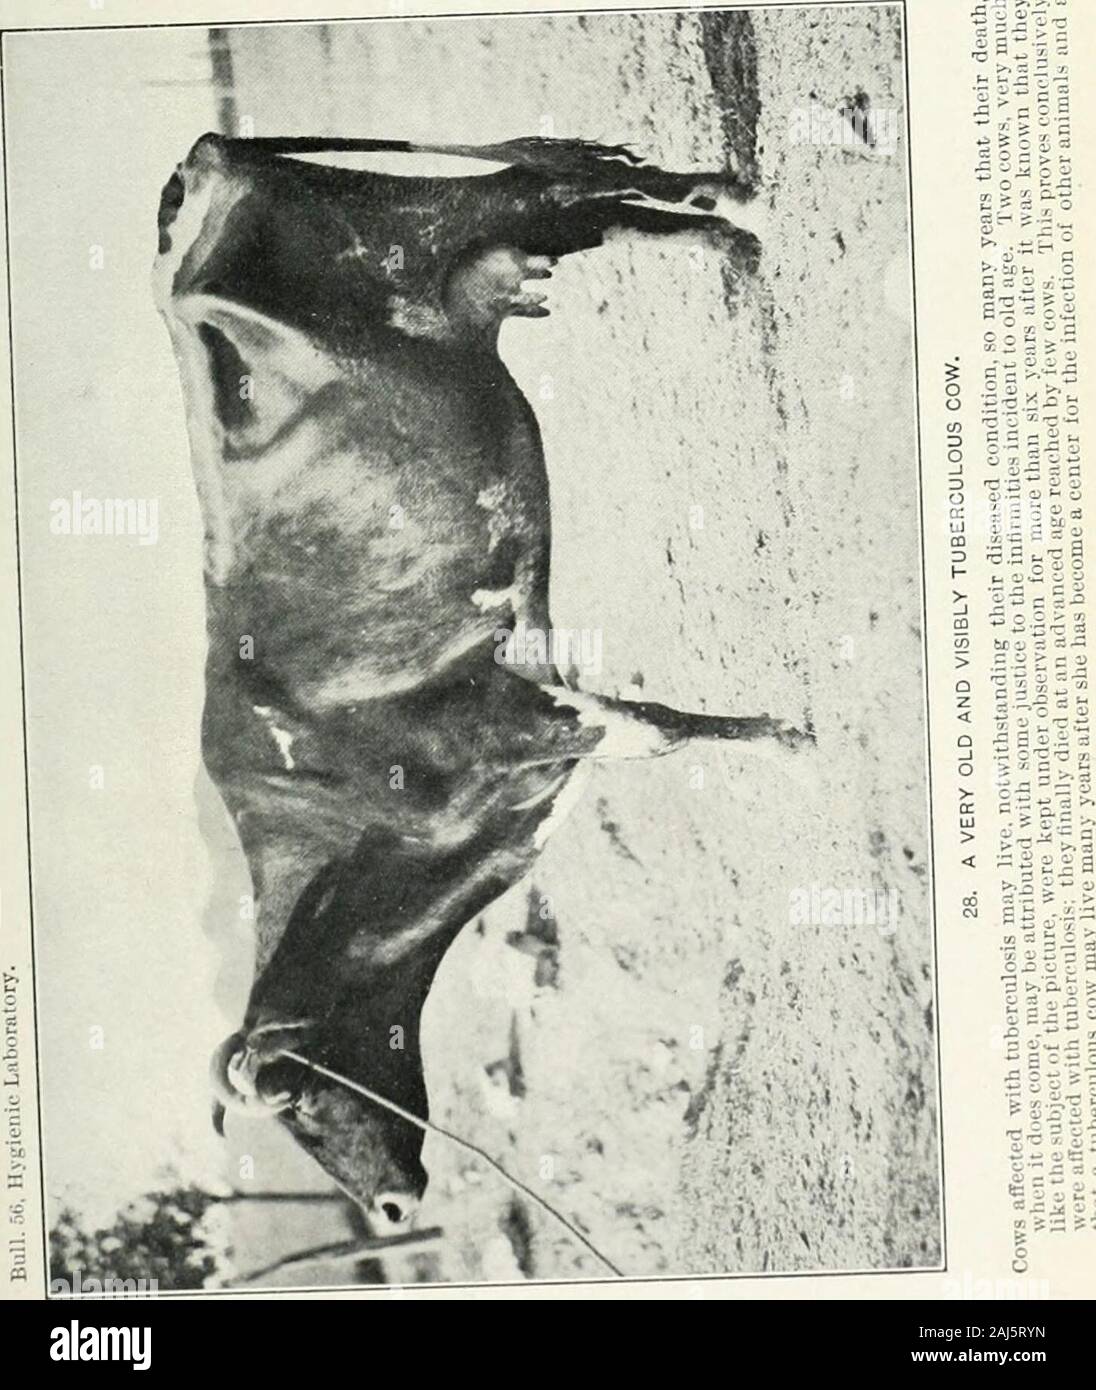 Digest of comments on The pharmacopia of the United States of America and on the National formulary .. 1905-1922 . ?mm 537 ?i,[)tional conditions. All the photographs are those of animals thatWile among a total of about 50 tuberculous cattle received at the ex-|i( liment station during the last three ^years, and among this total ofMl there were at least 25 animals that could well have been used toIllustrate the excellent physical condition of dangerously tuberculousr,iile and about 40 that could have been used to illustrate simply theJH-althy, normal appearance of tuberculous cows. As all pers Stock Photo